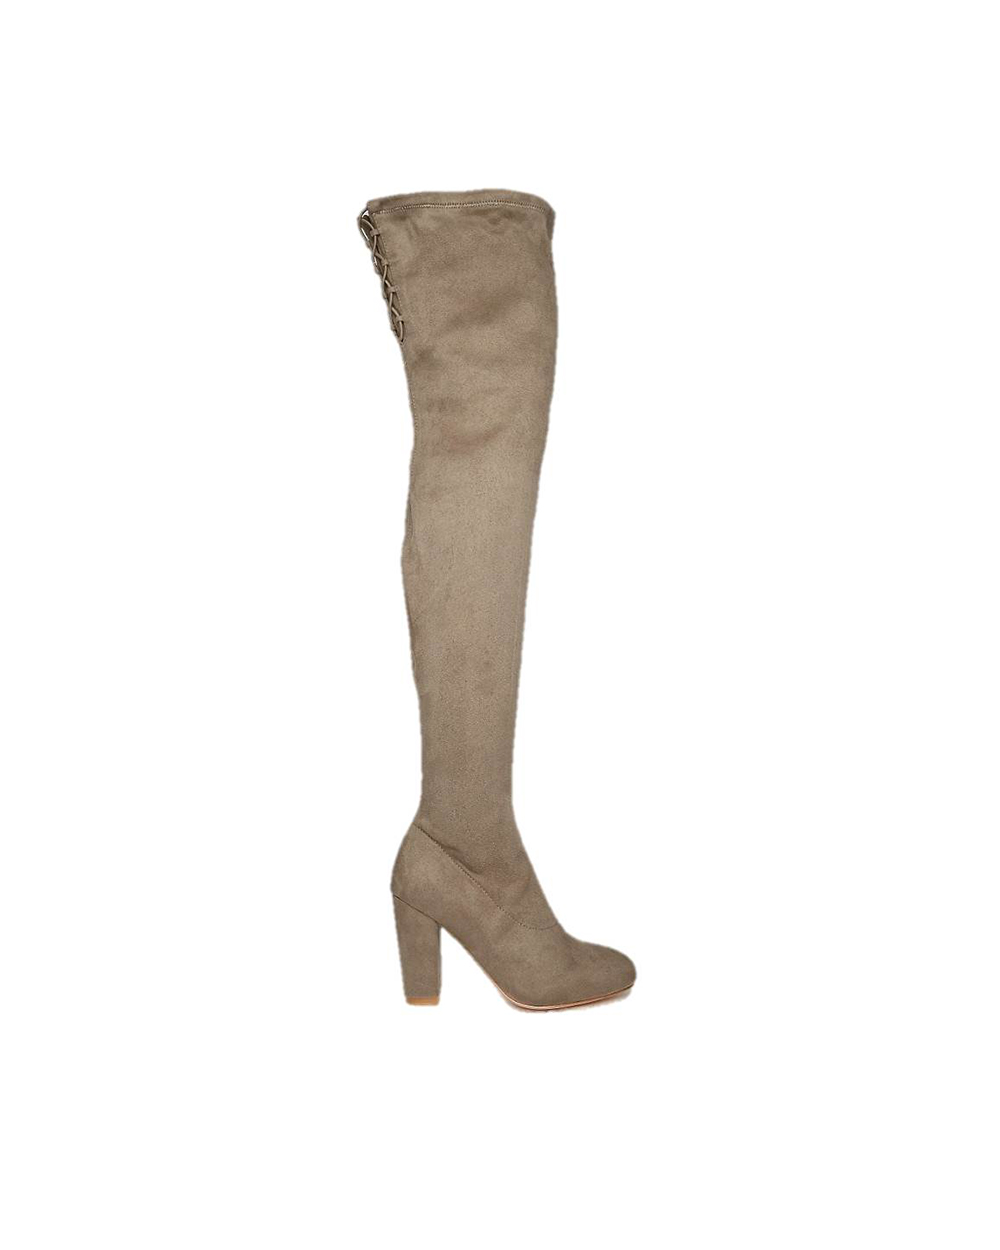 Lace Up Over The Knee Boots, $144.74, From ASOS